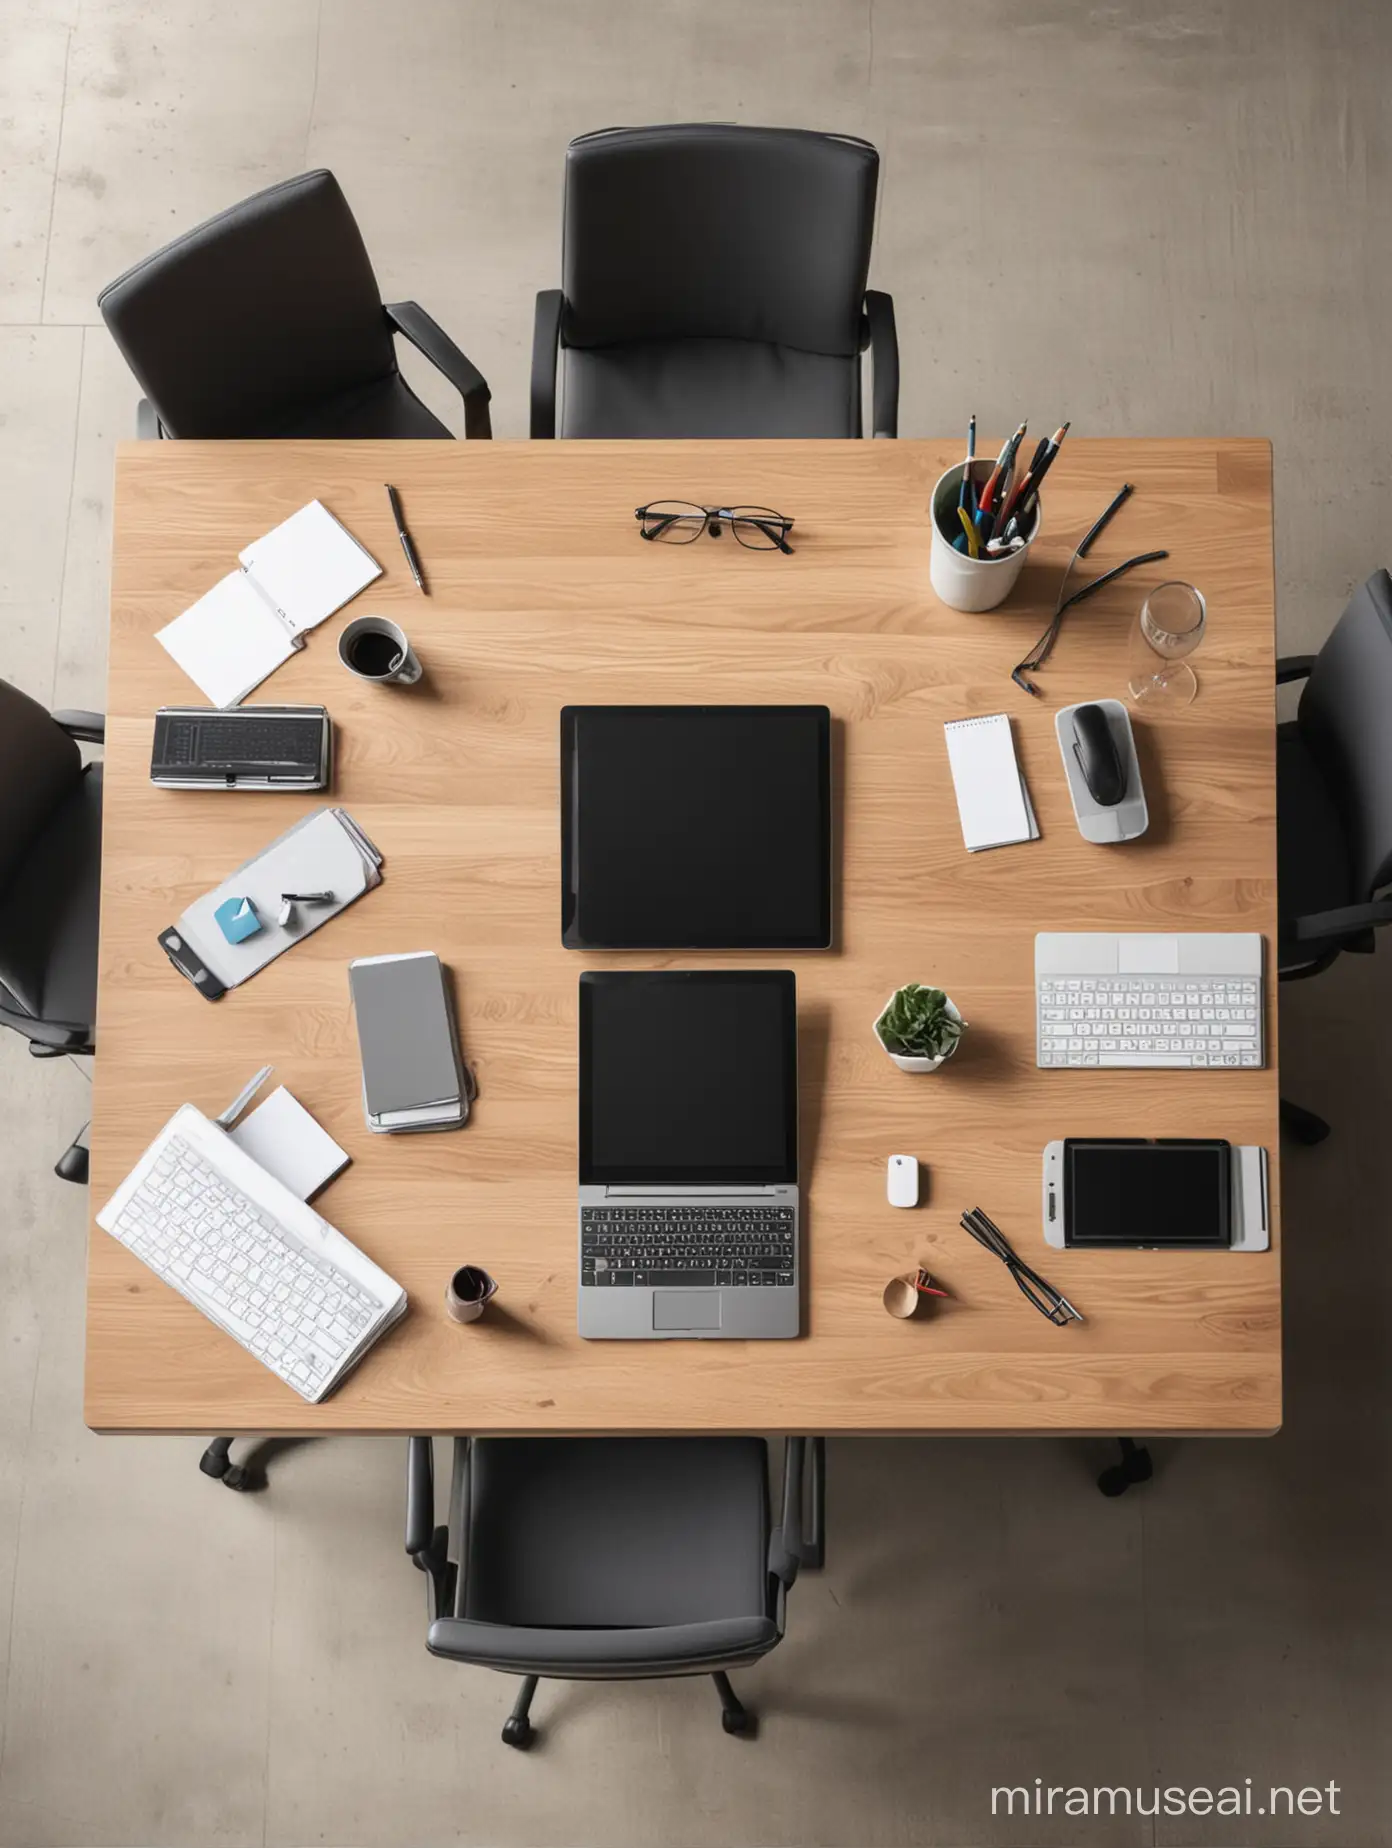 design a no person business meeting table with office equipment and communication tools on it